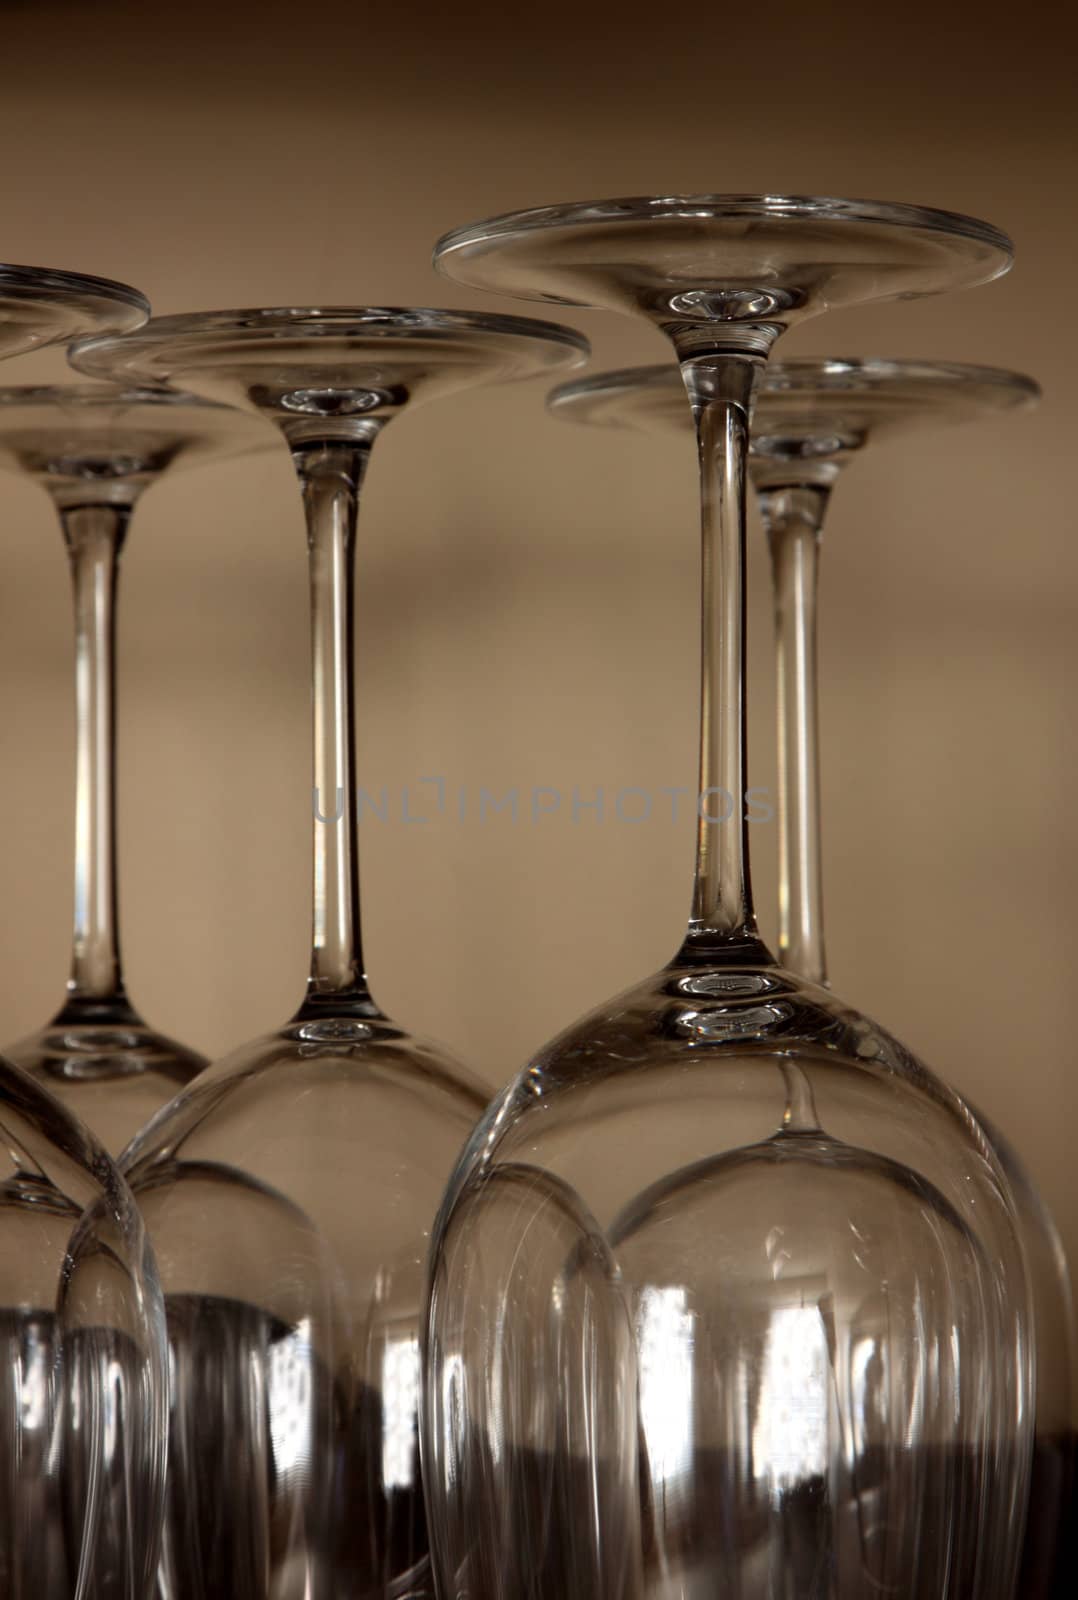 Upside Down Wine Glasses
 by ca2hill